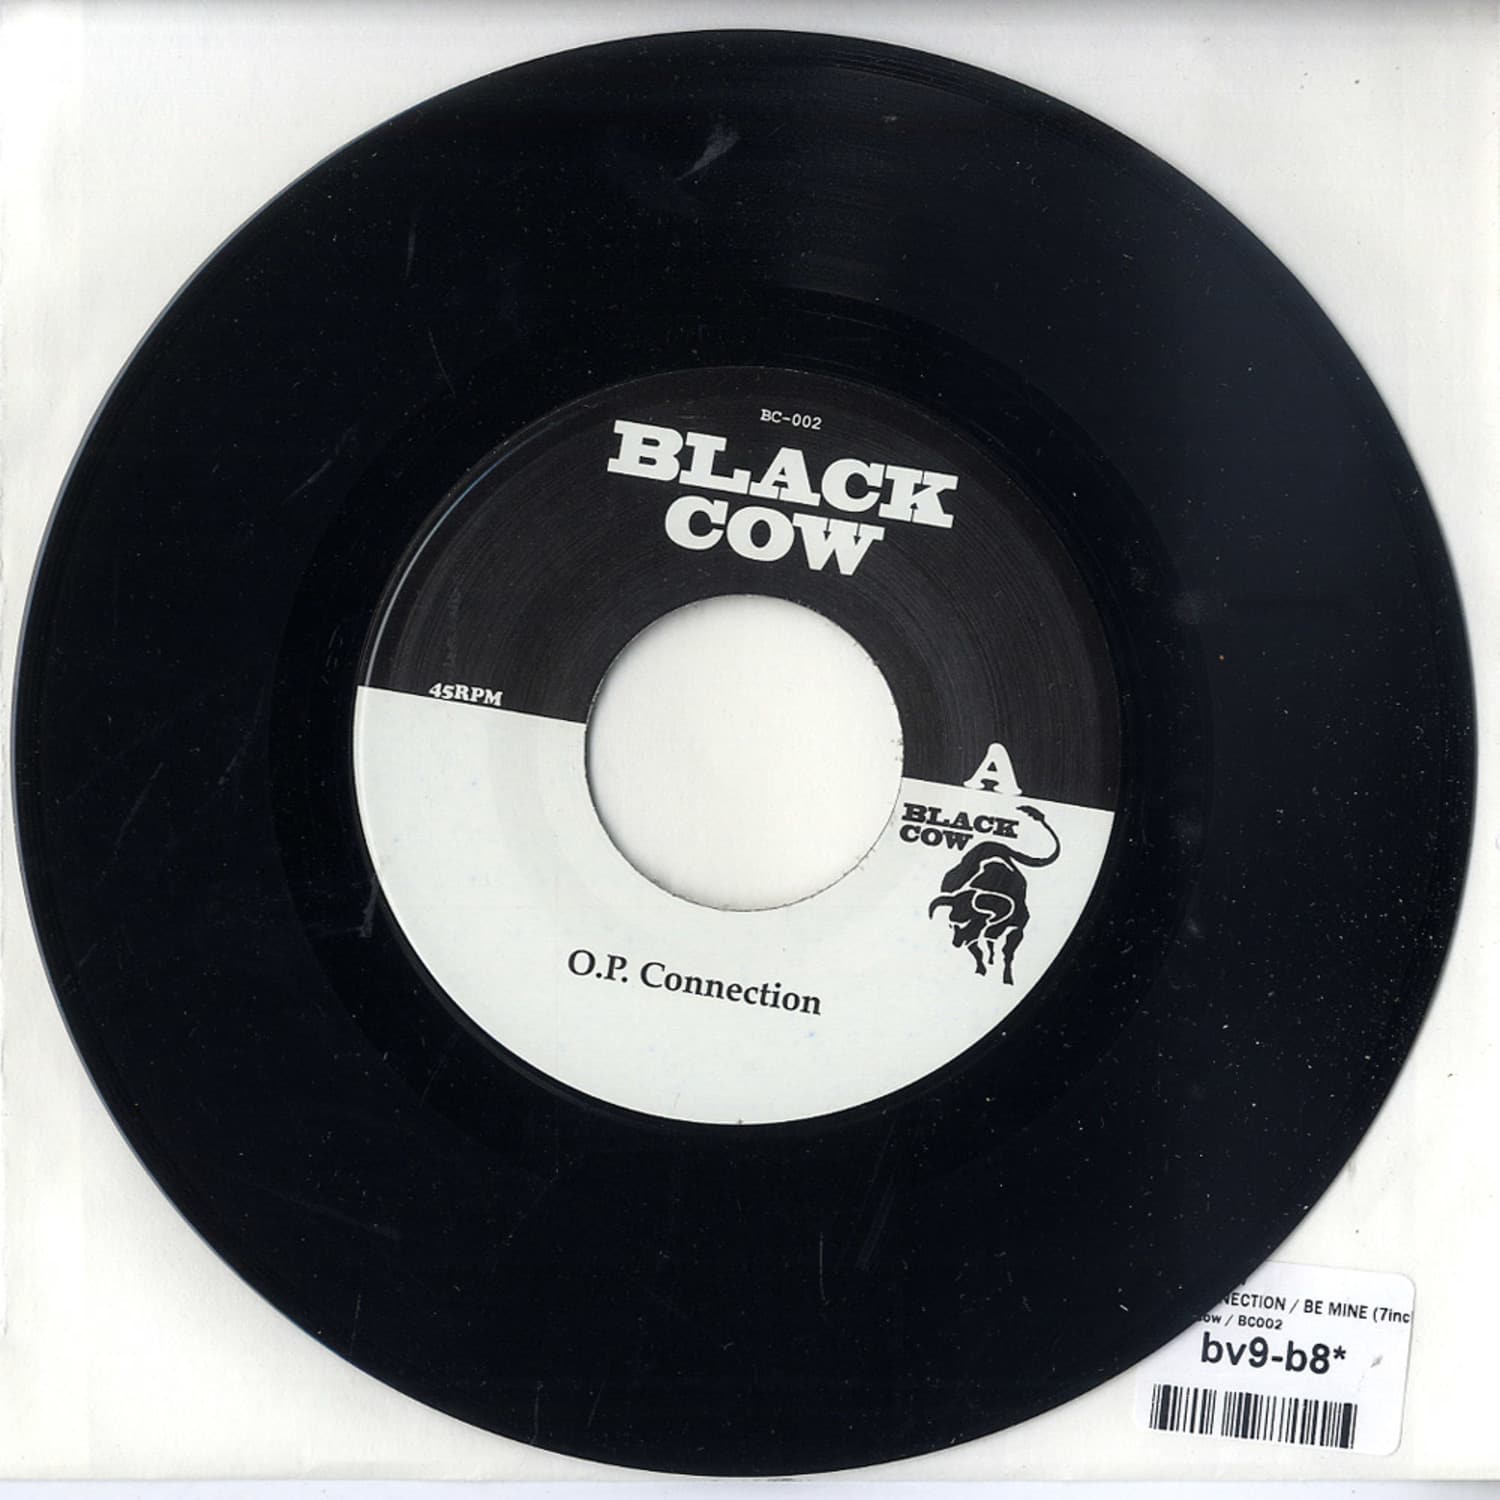 Black Cow - O.P. CONNECTION / BE MINE 